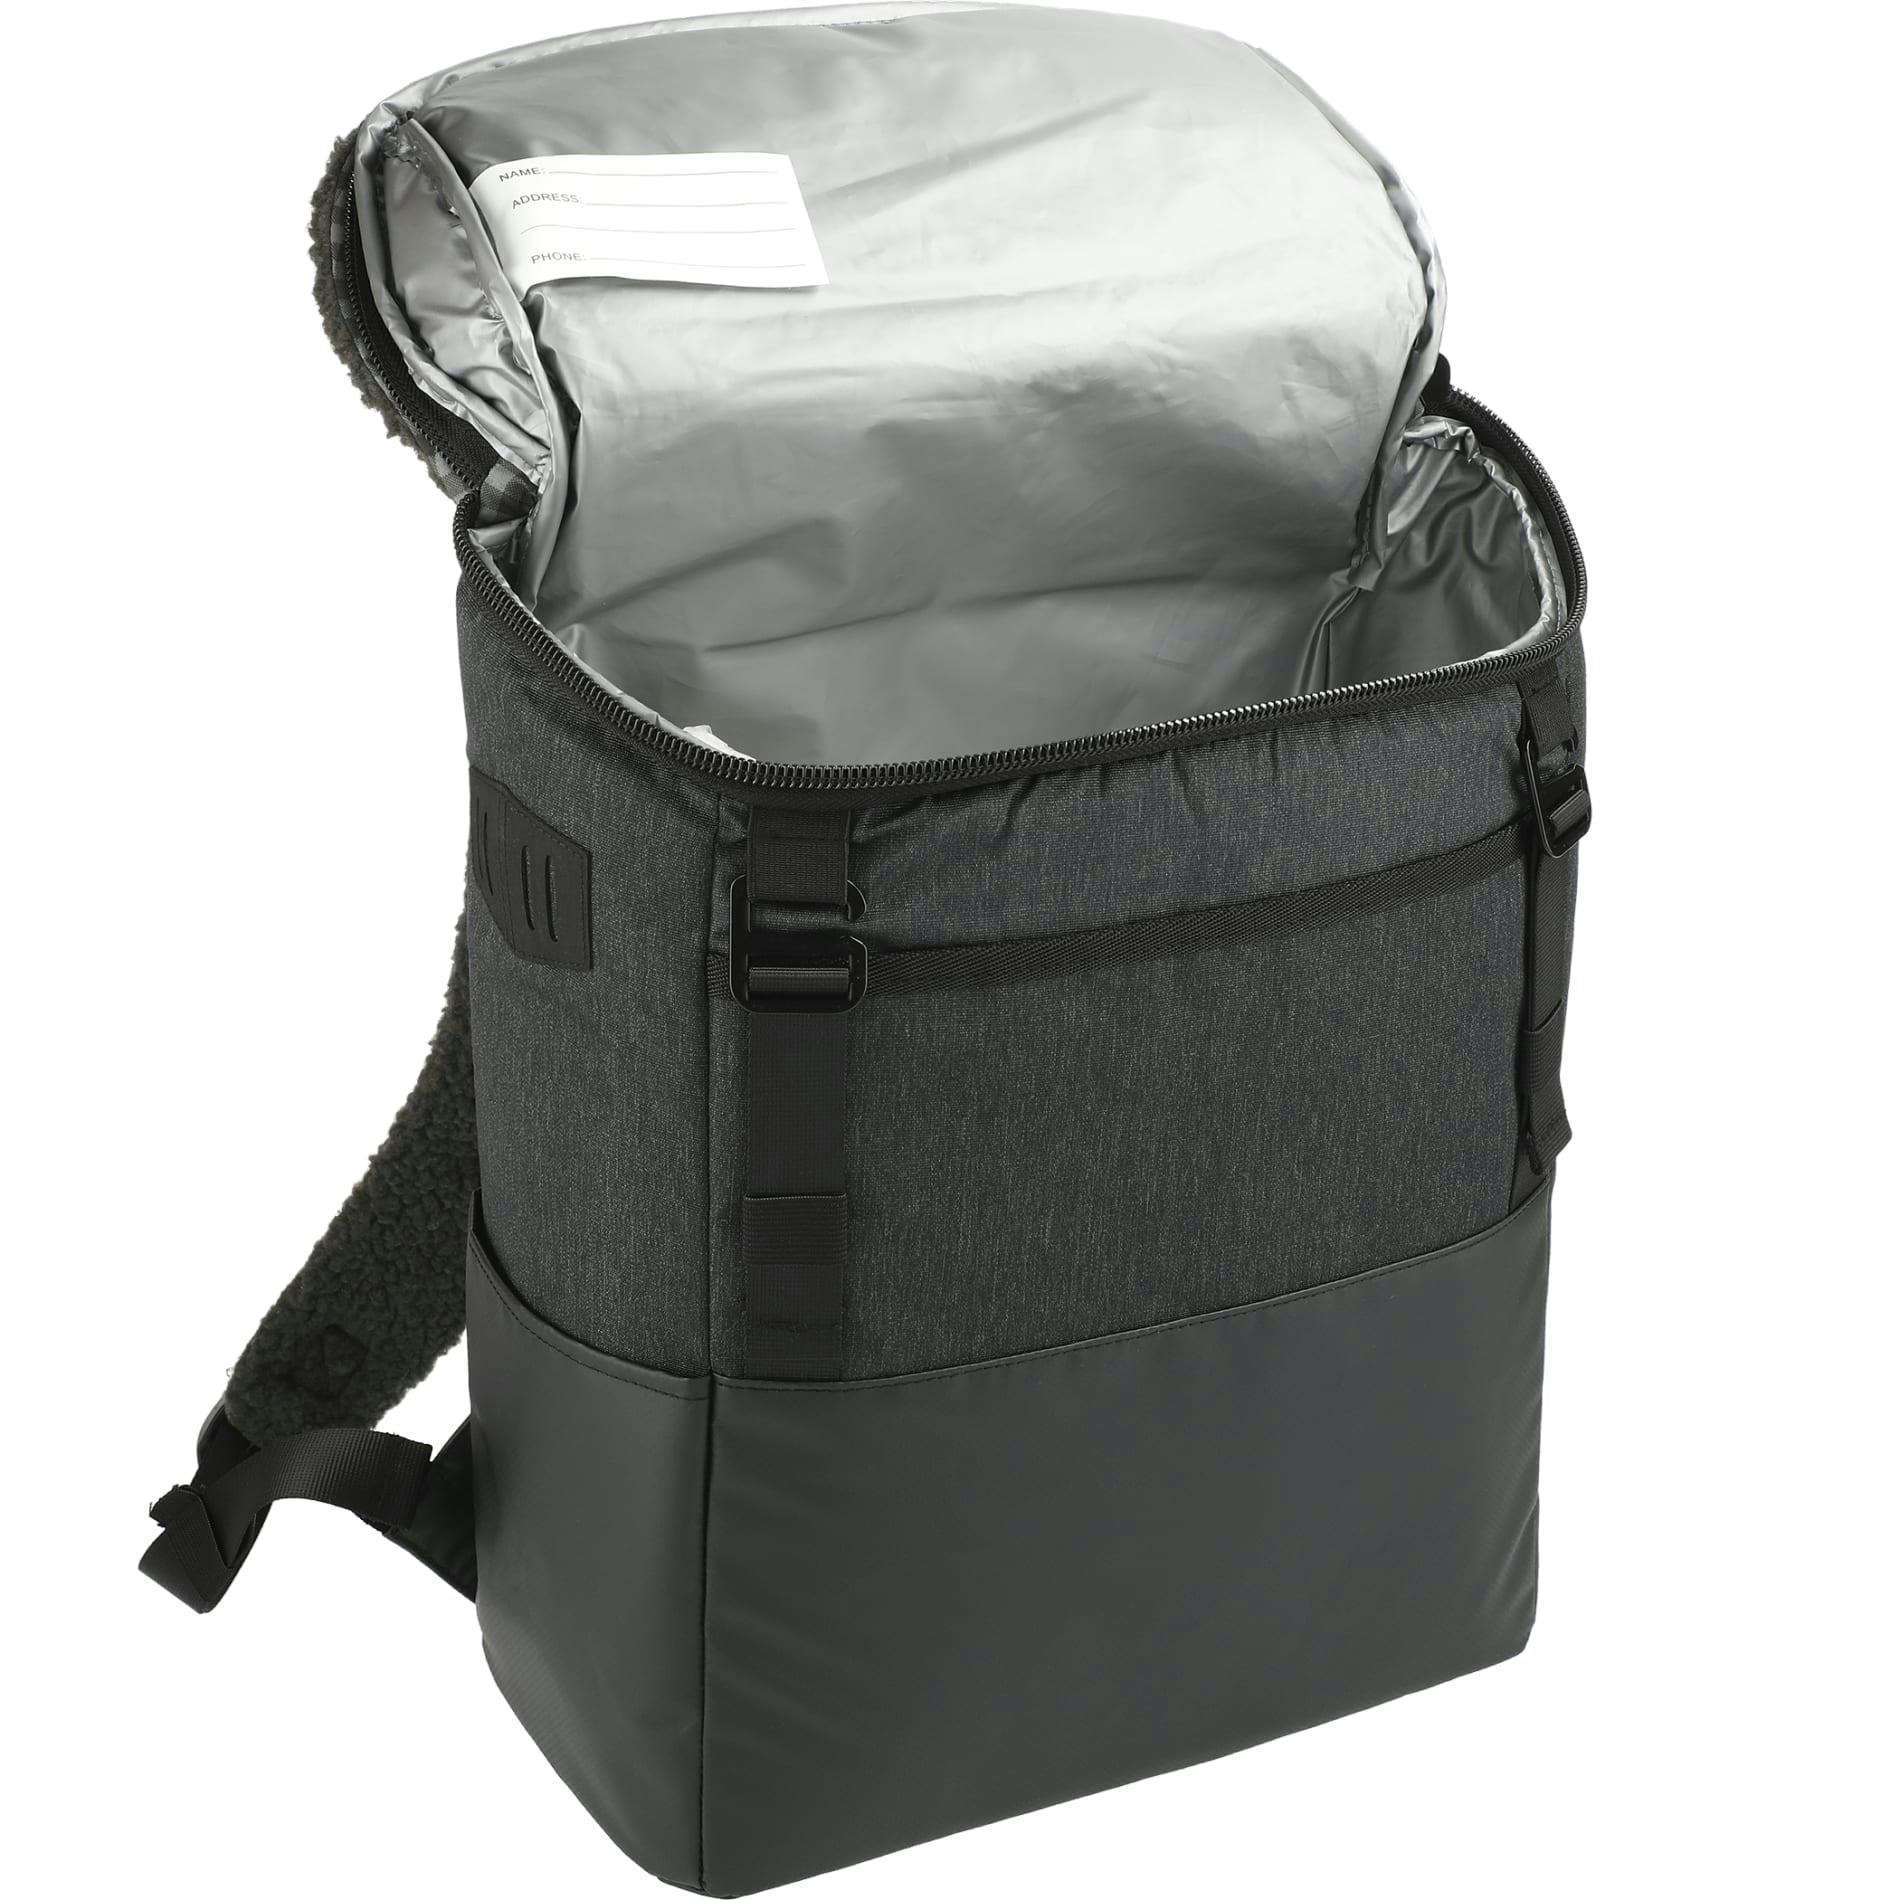 Field & Co. Fireside Eco 12 Can Backpack Cooler - additional Image 5